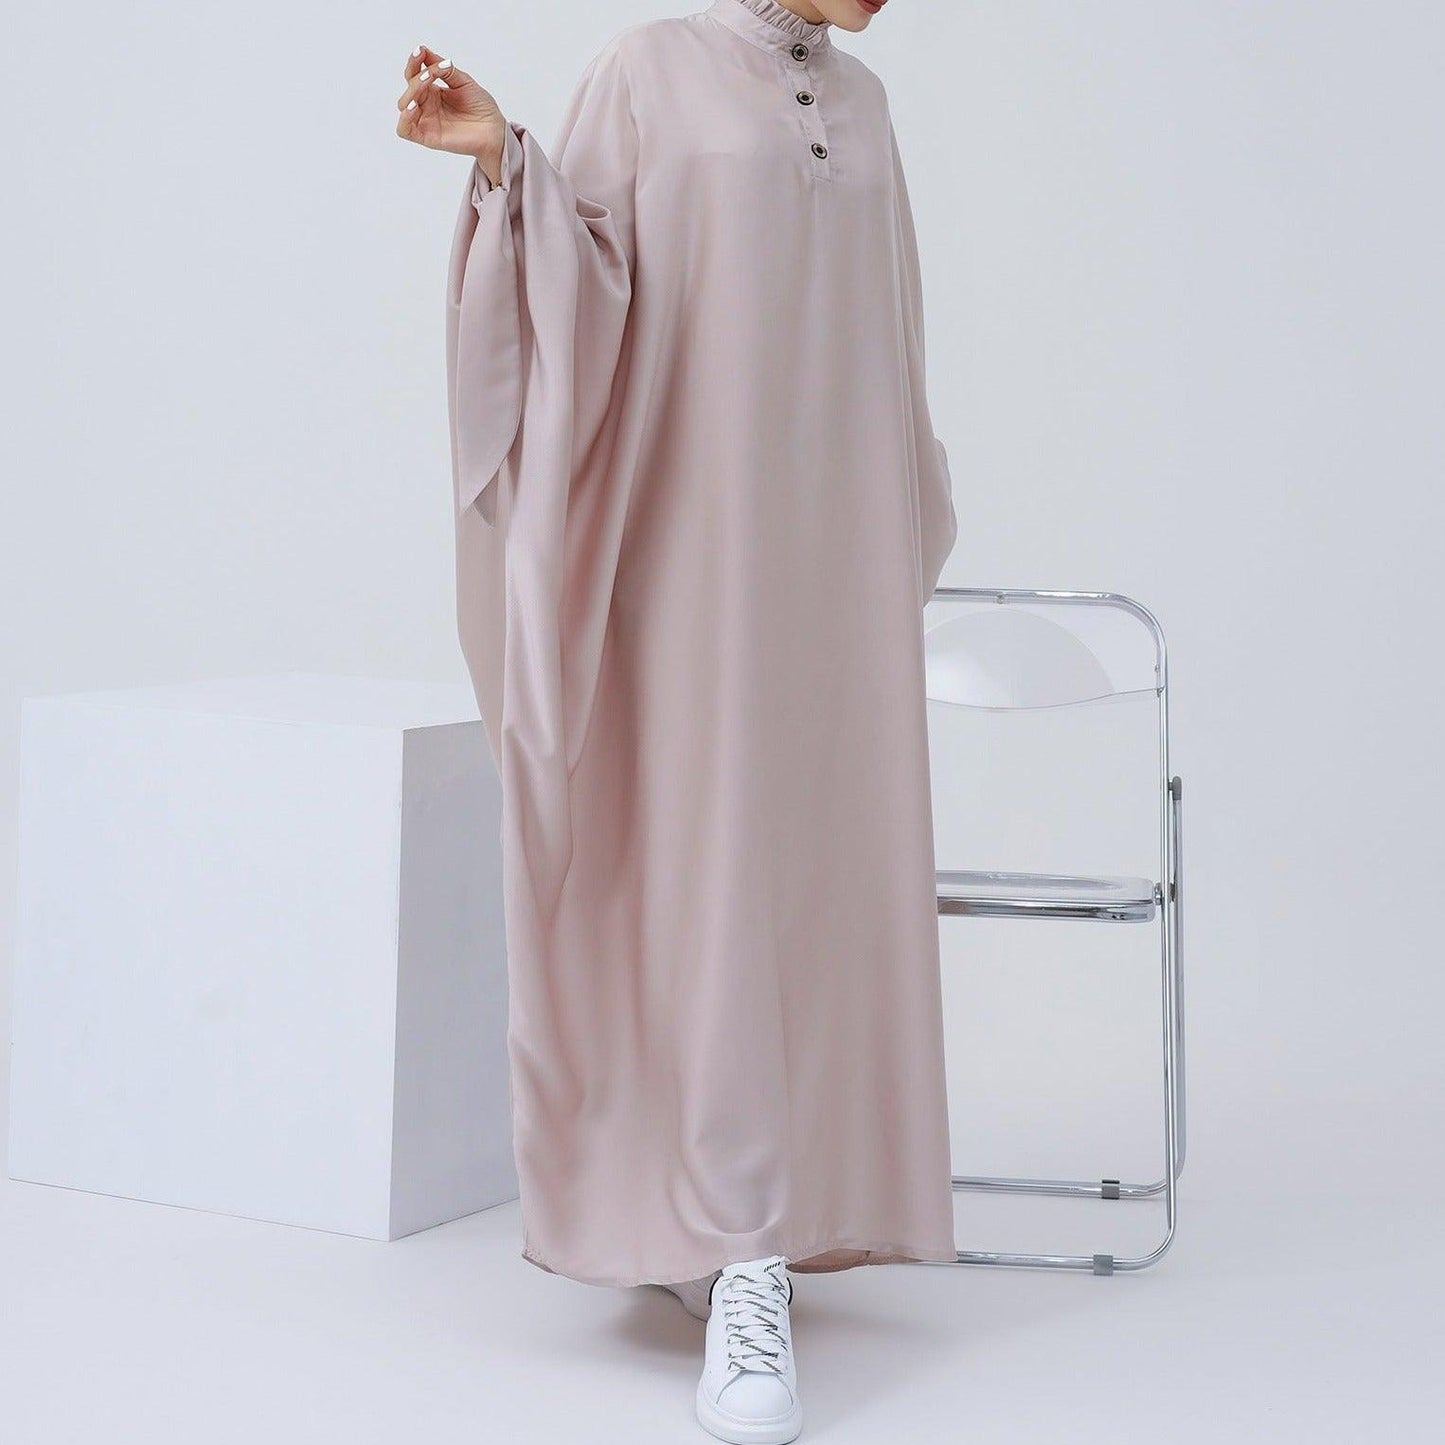 Folk batwing abaya with bow sleeves - Try Modest Limited 